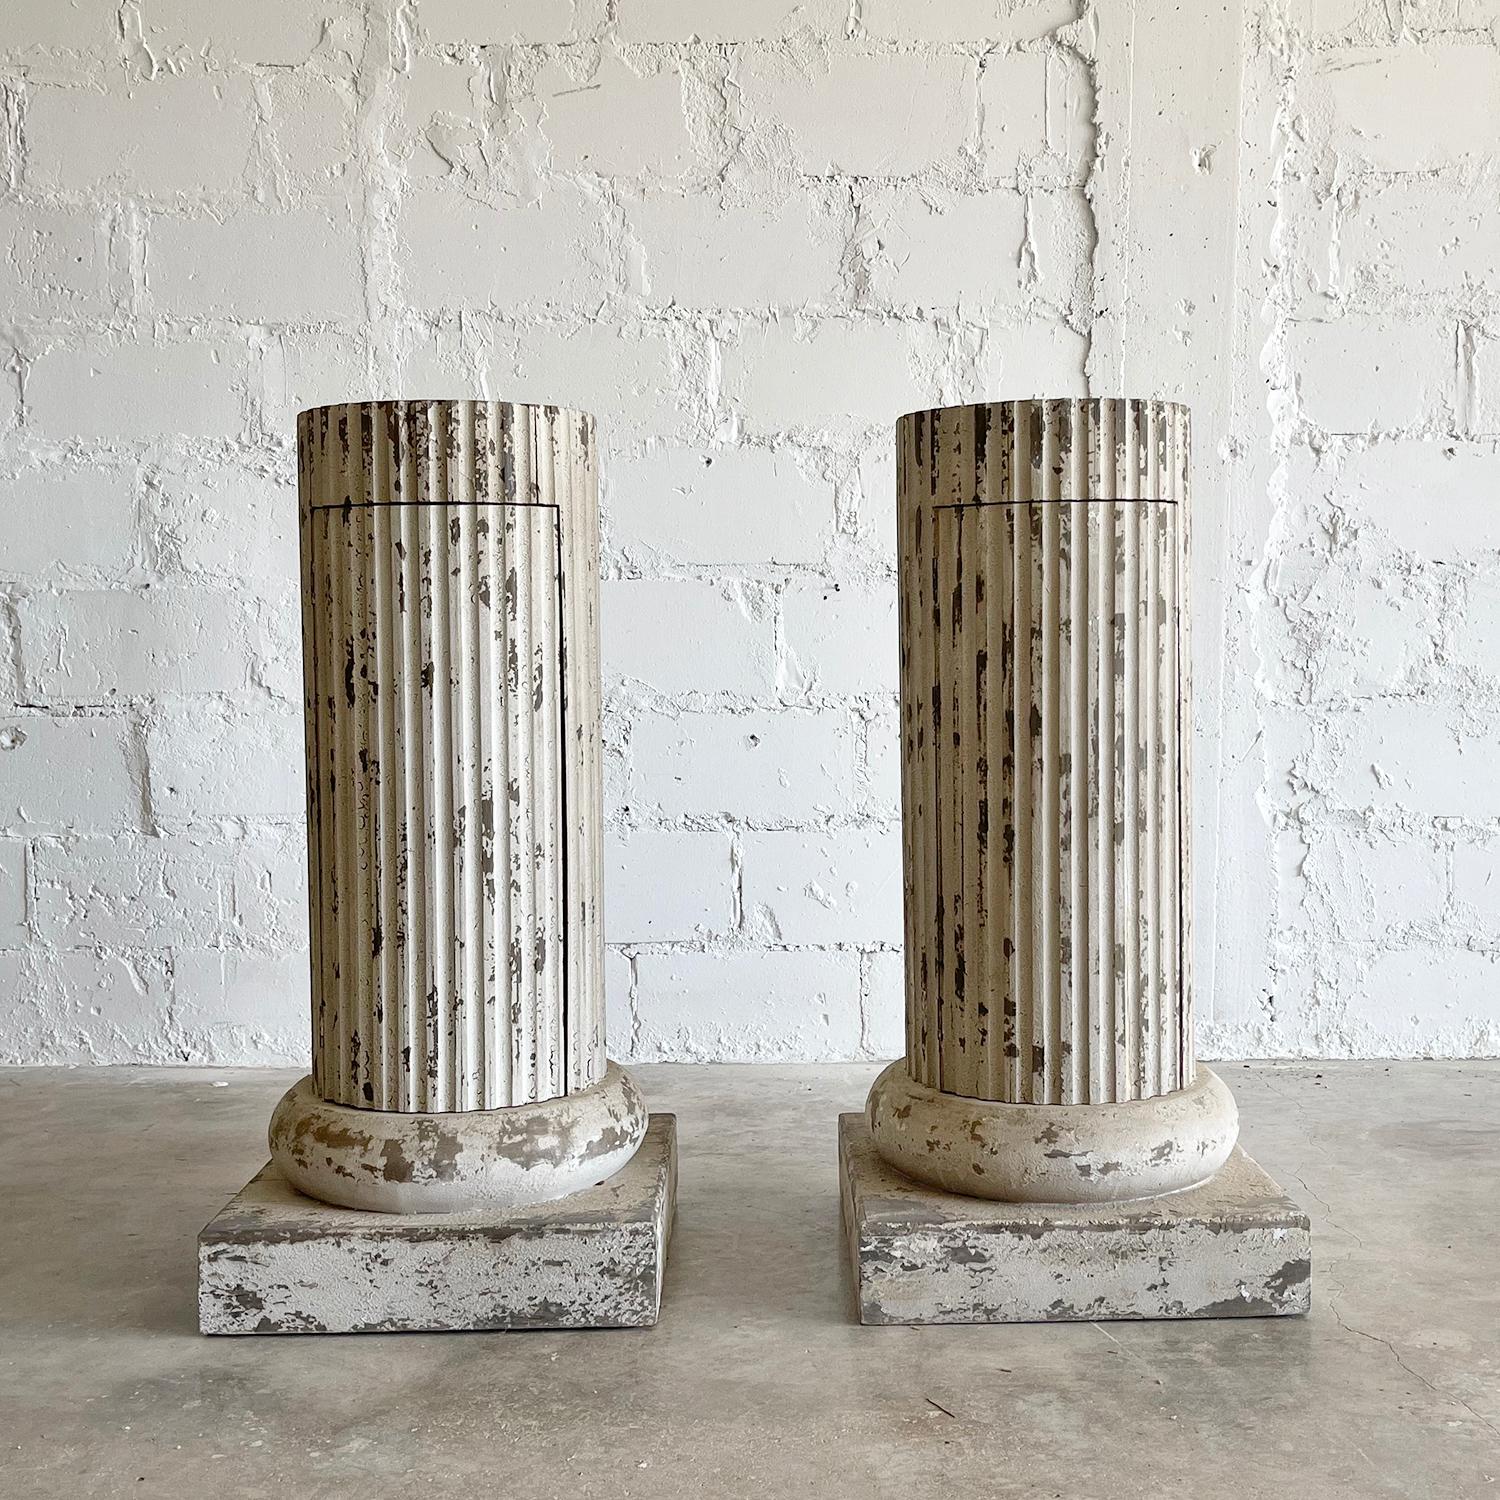 An antique pair of fluted Pinewood circular columns chests with one door and a shelf, painted in a white-grey finish on square bases, in good condition. Inspired by classical architecture and perfect for displays or storage. Circa 1800, France.